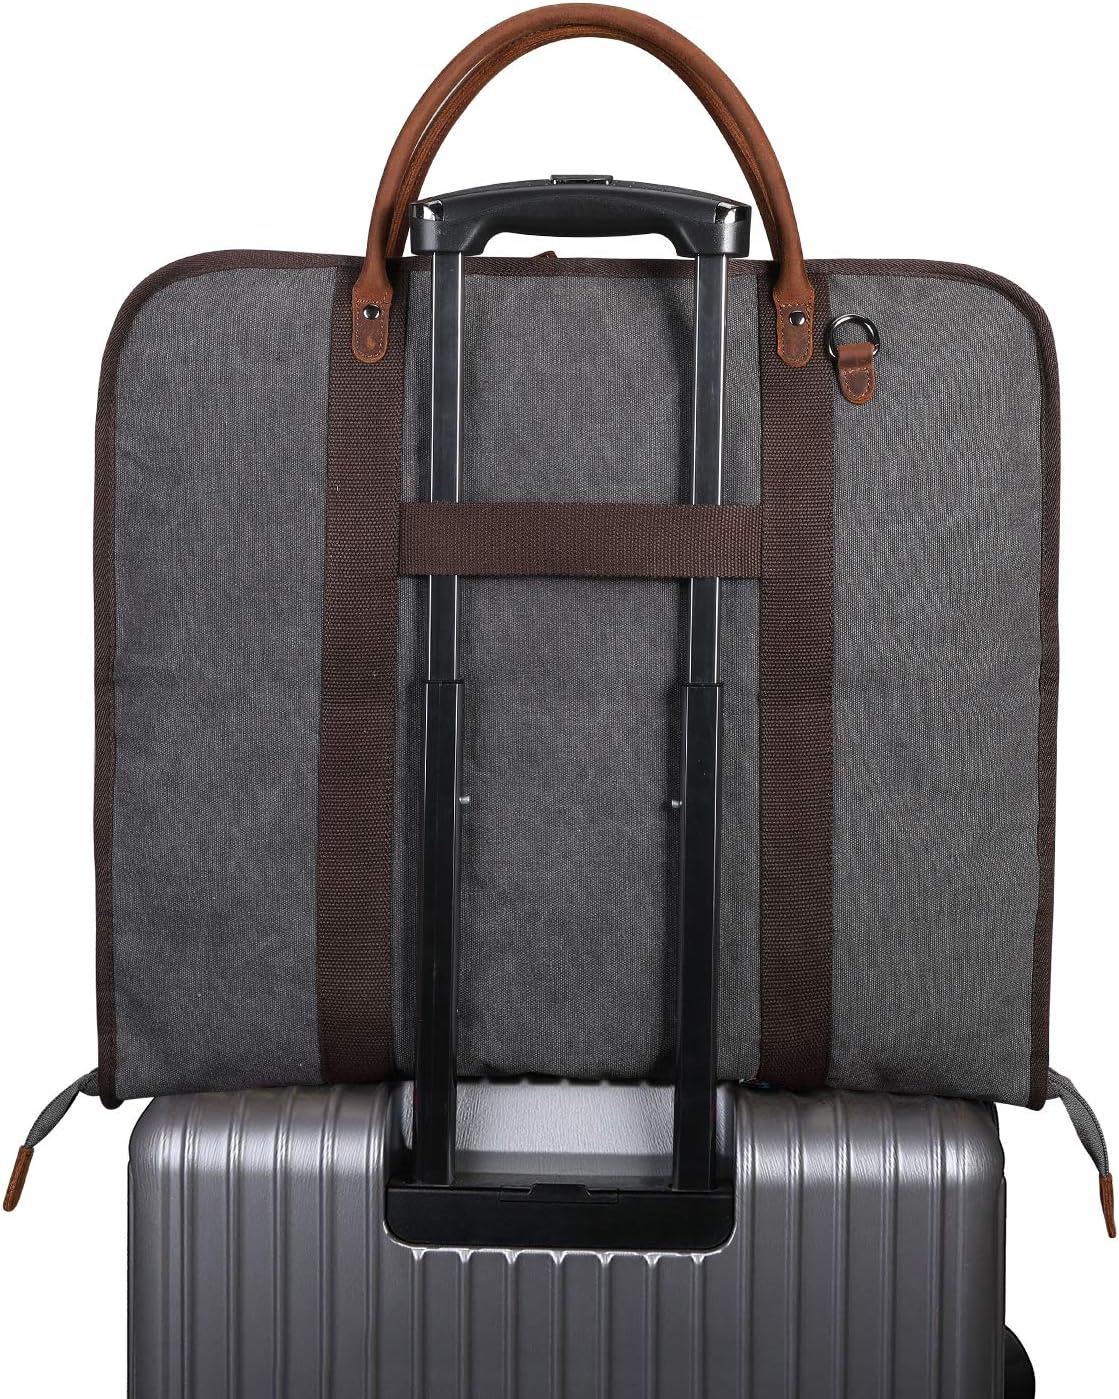 Grey Canvas Carry-On Garment Bag with Genuine Leather Trim for Business Trips...